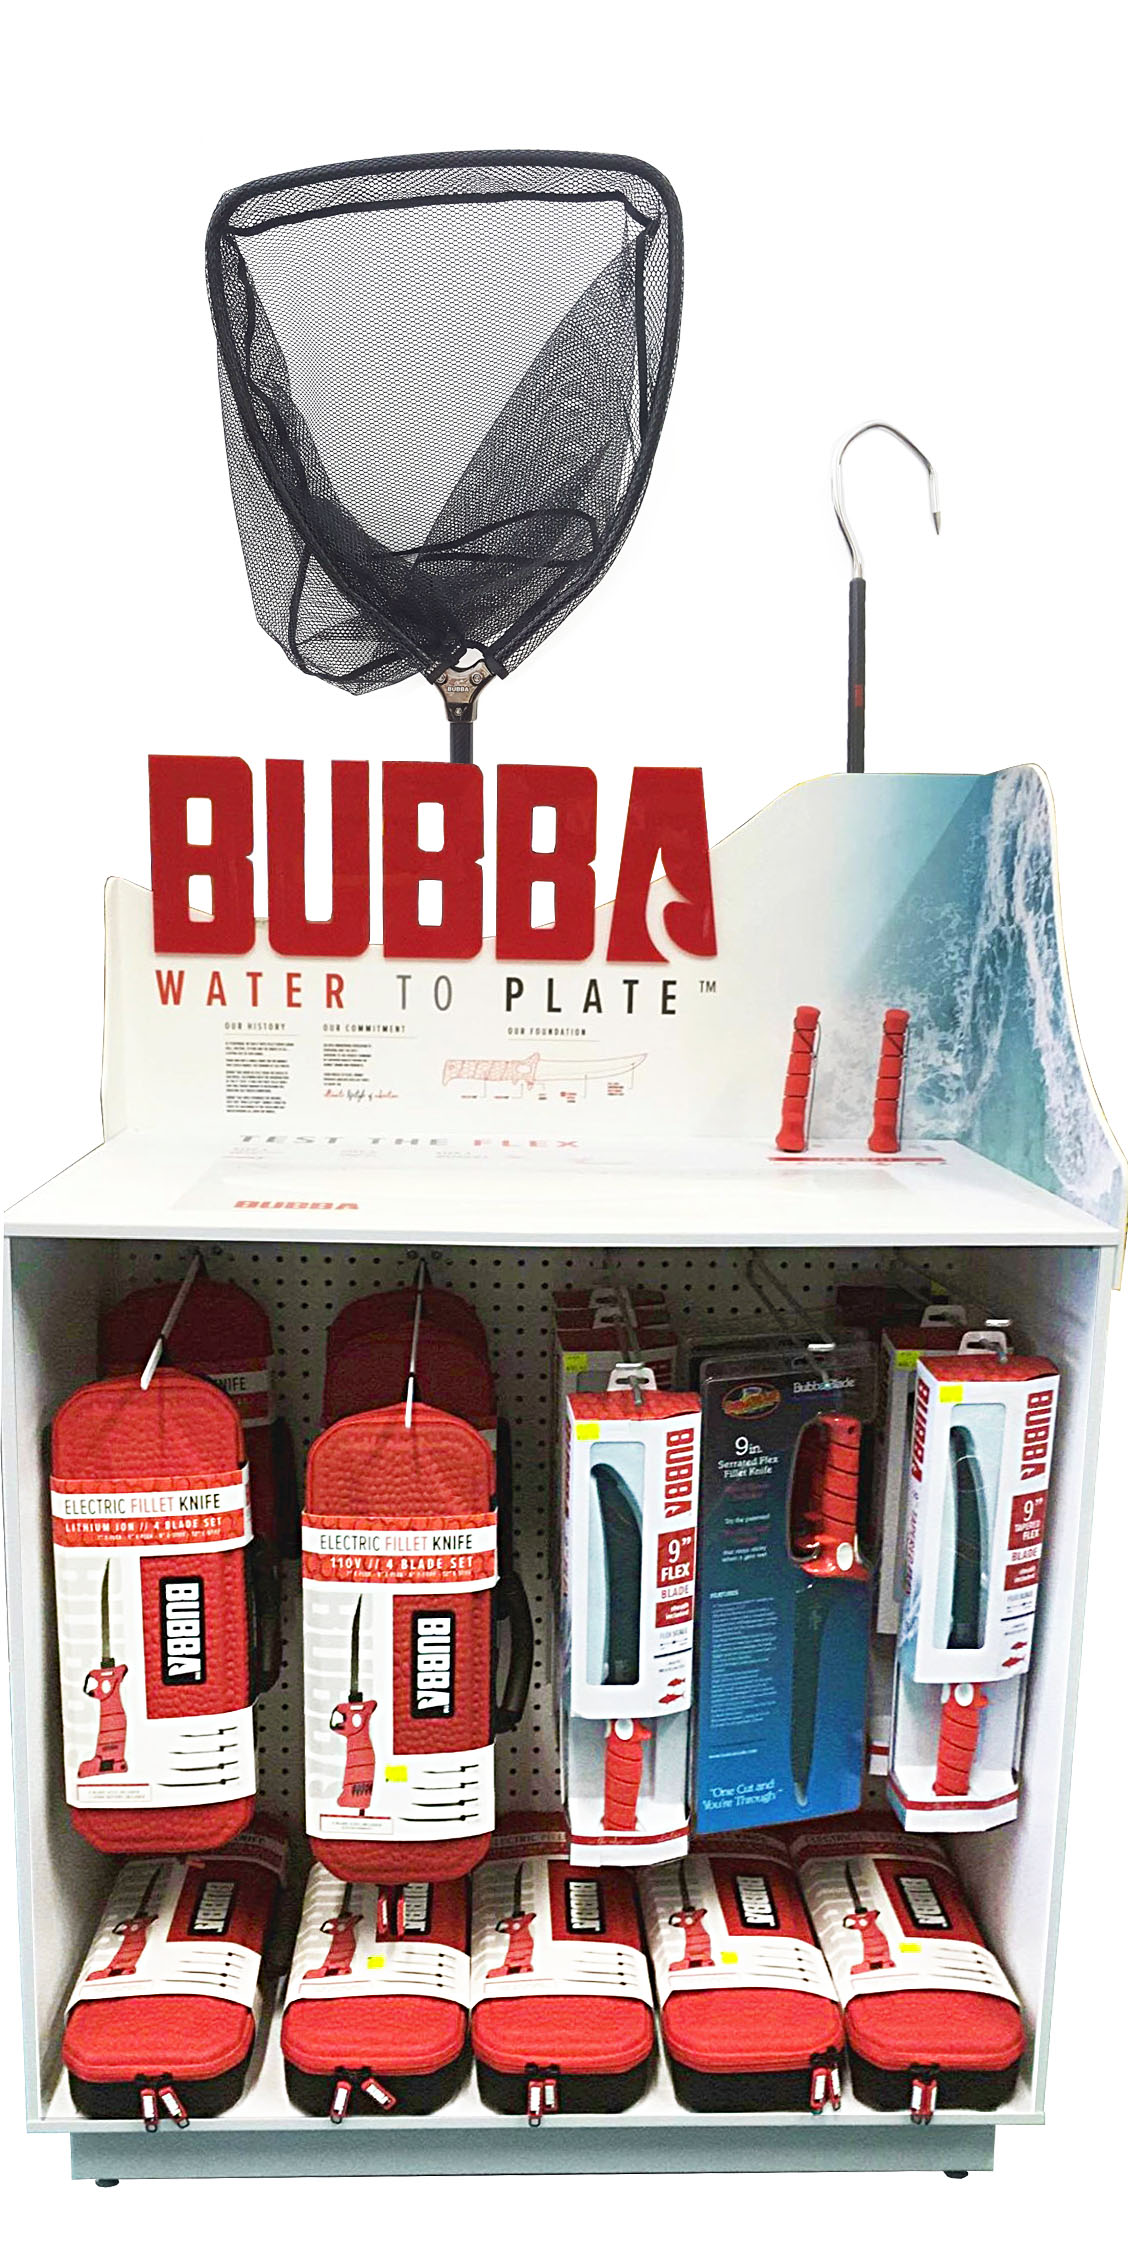 BUBBA Captures Sport Fishing Lifestyle with Latest Merchandising Display –  Visual Merchandising and Store Design